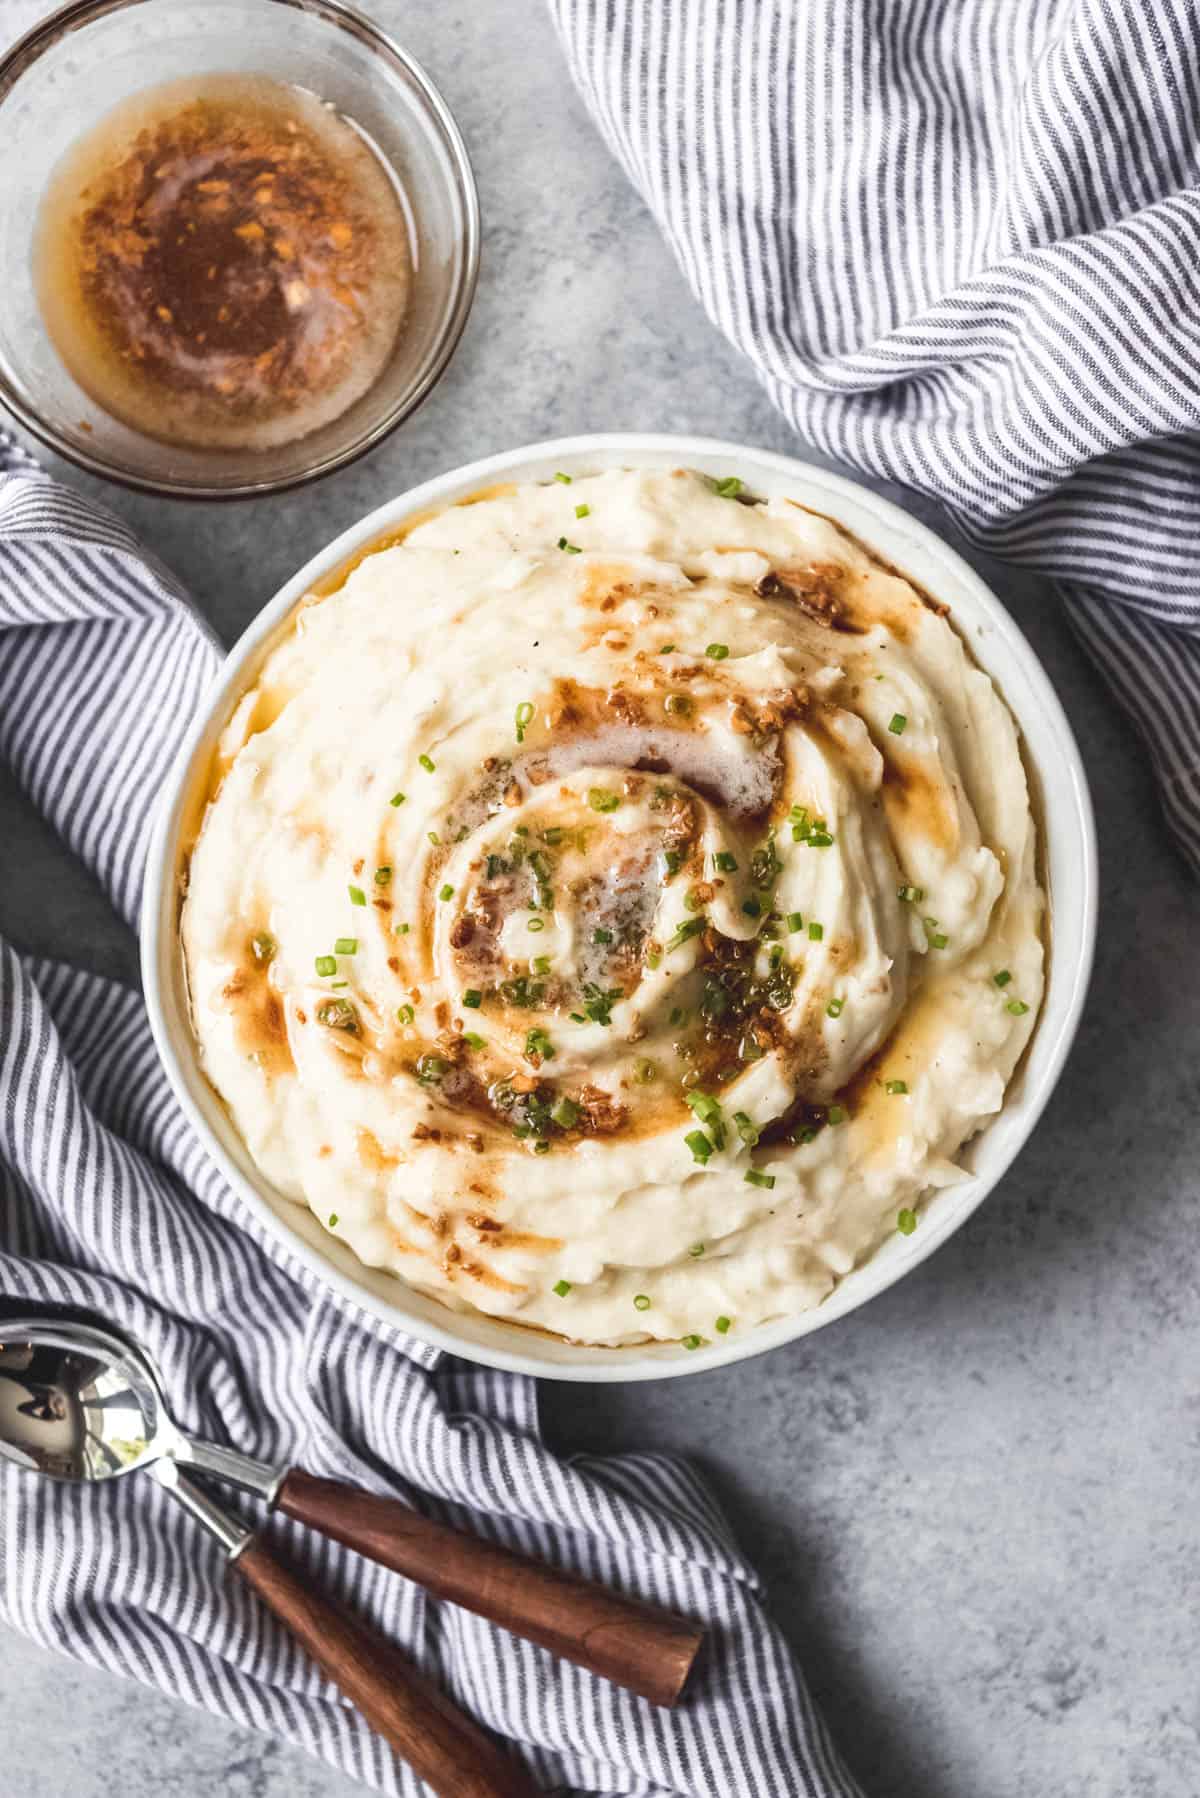 An image of a large bowl of buttery mashed potatoes for Thanksgiving or Christmas dinner with extra browned butter on the side.